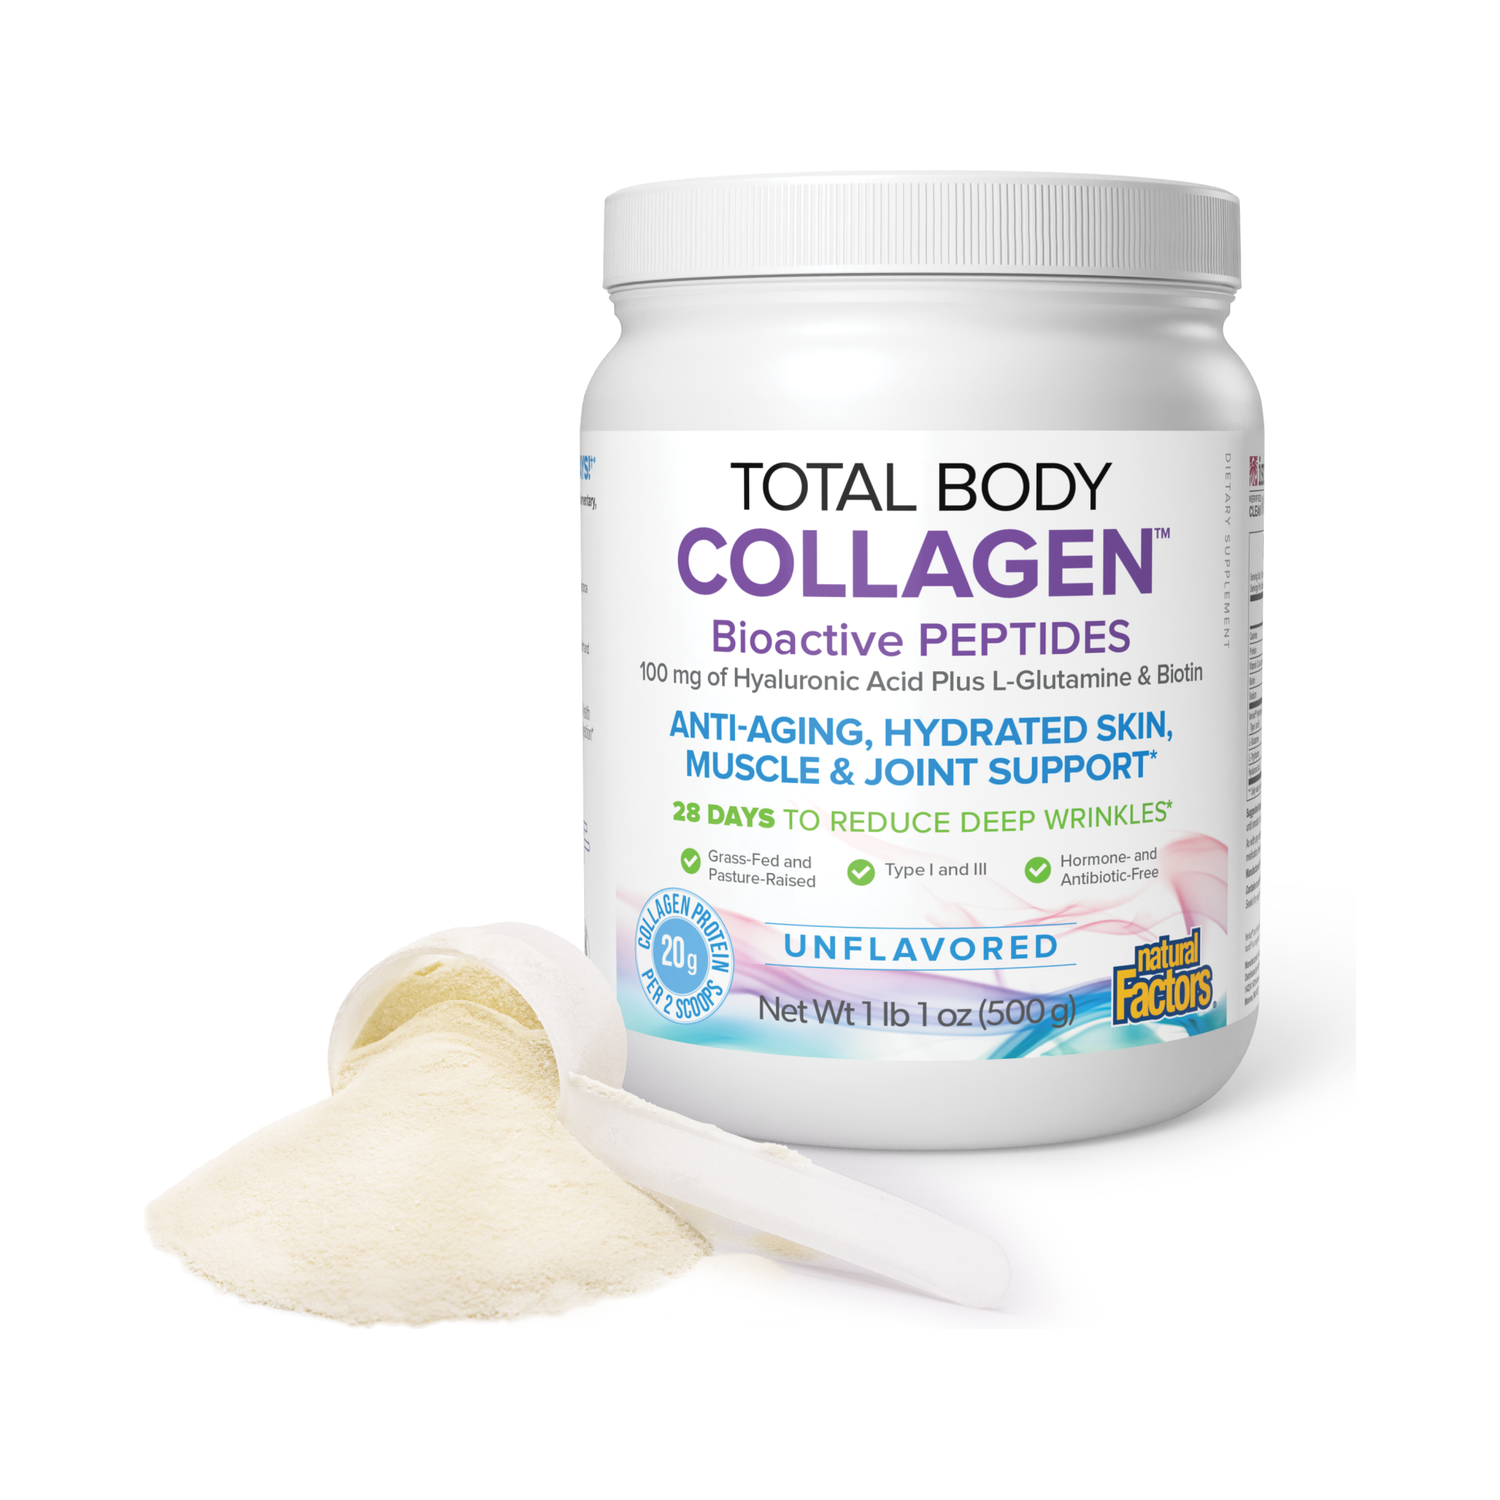 Total Body Collagen™️ Bioactive Peptides Powder Unflavored for Total Body Collagen |variant|hi-res|2632U